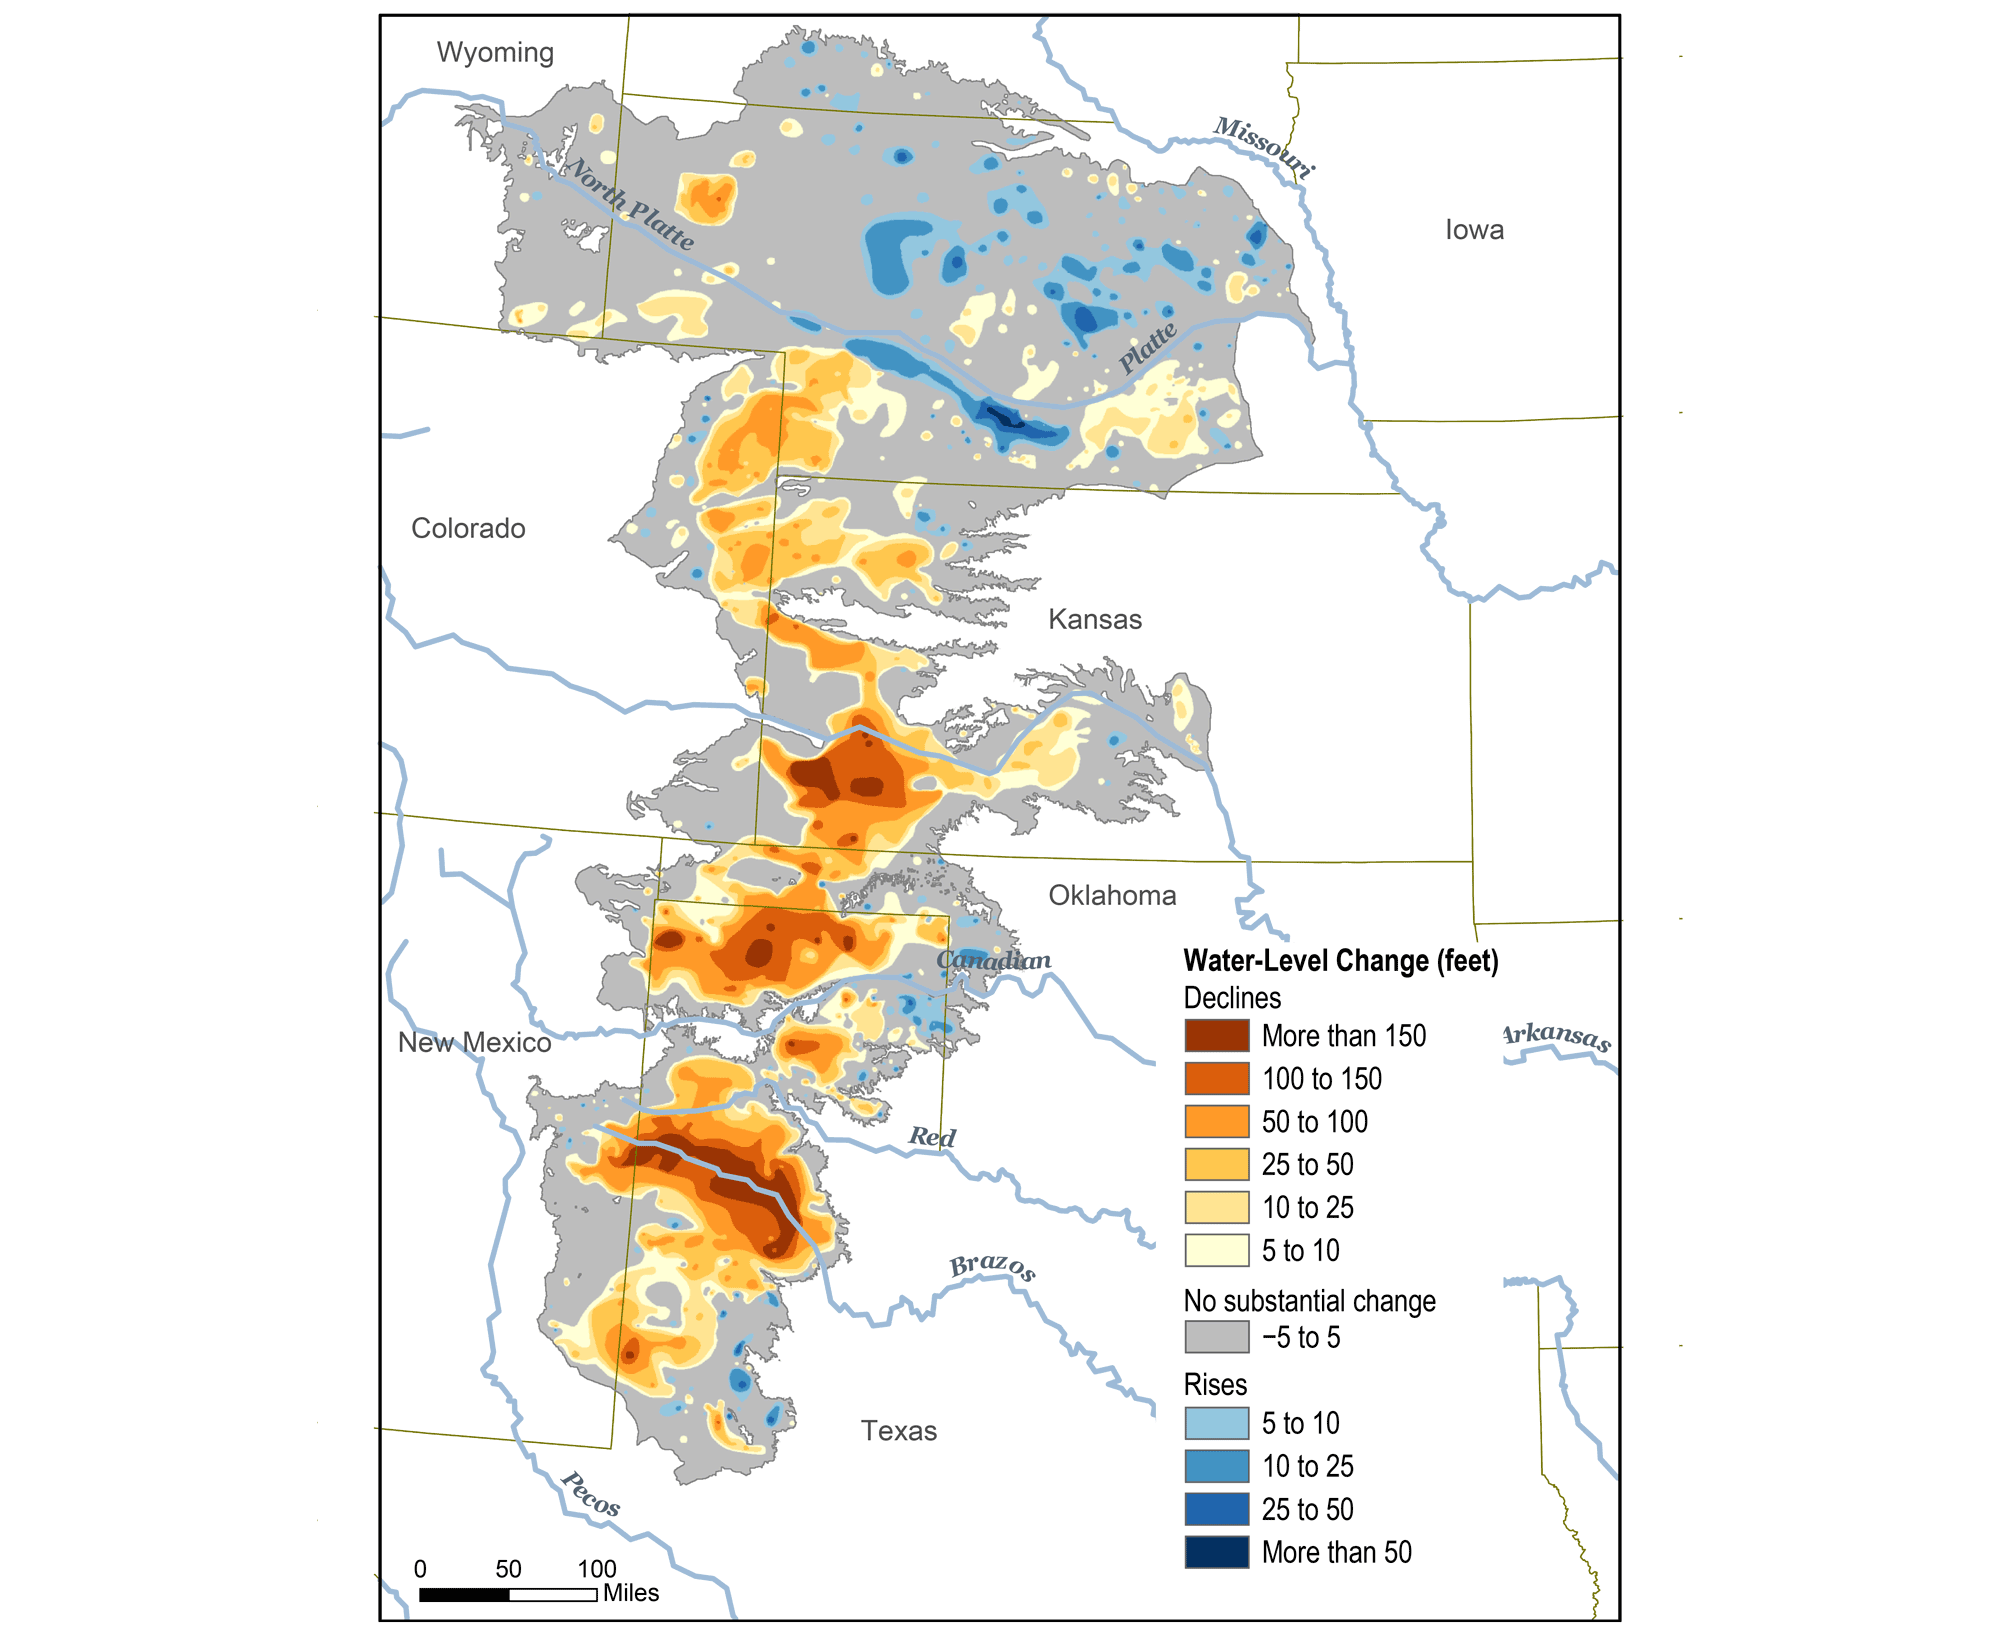 Map of the central U.S. showing the boundaries of the Ogallala aquifer. Colors on the image indicate the water level relative to the original water level of the aquifer before people starting pumping water out of it. In many areas of the aquifer, water levels have declined, sometimes by more than 150 feet.